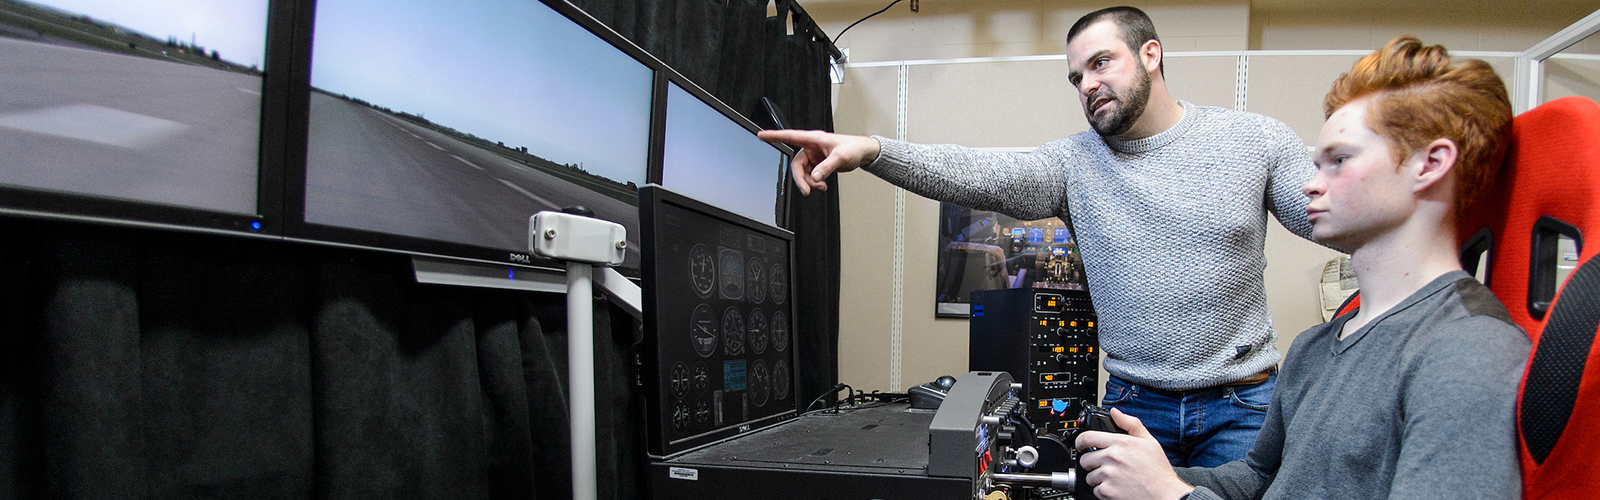 Student sits in front of flight simulator with instructor offering guidance.